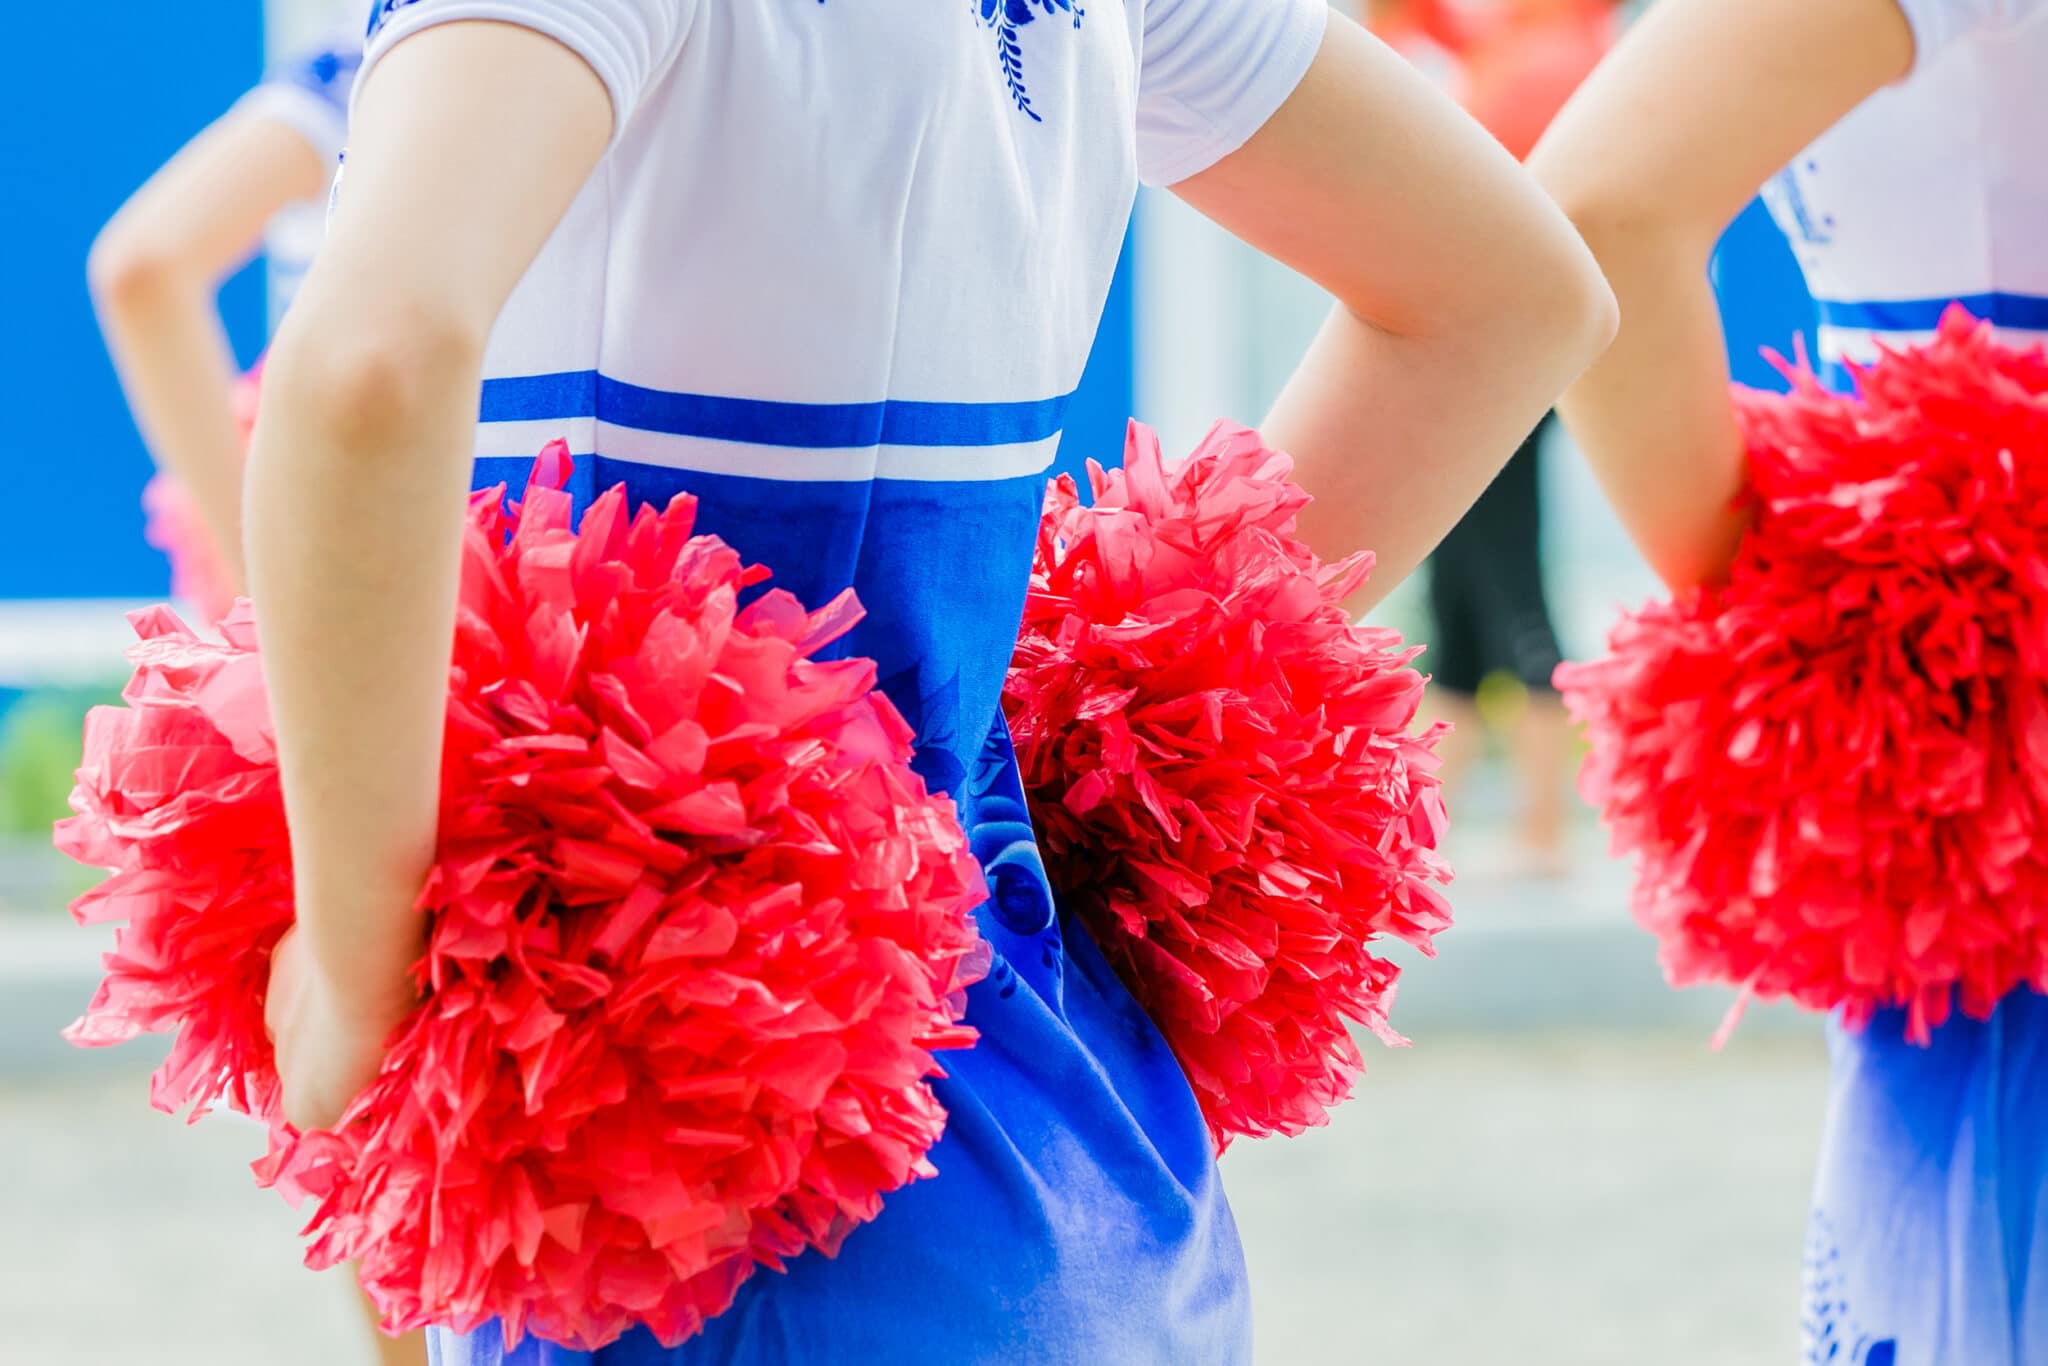 Cheerleading coach allegedly fired because he's gay. His students